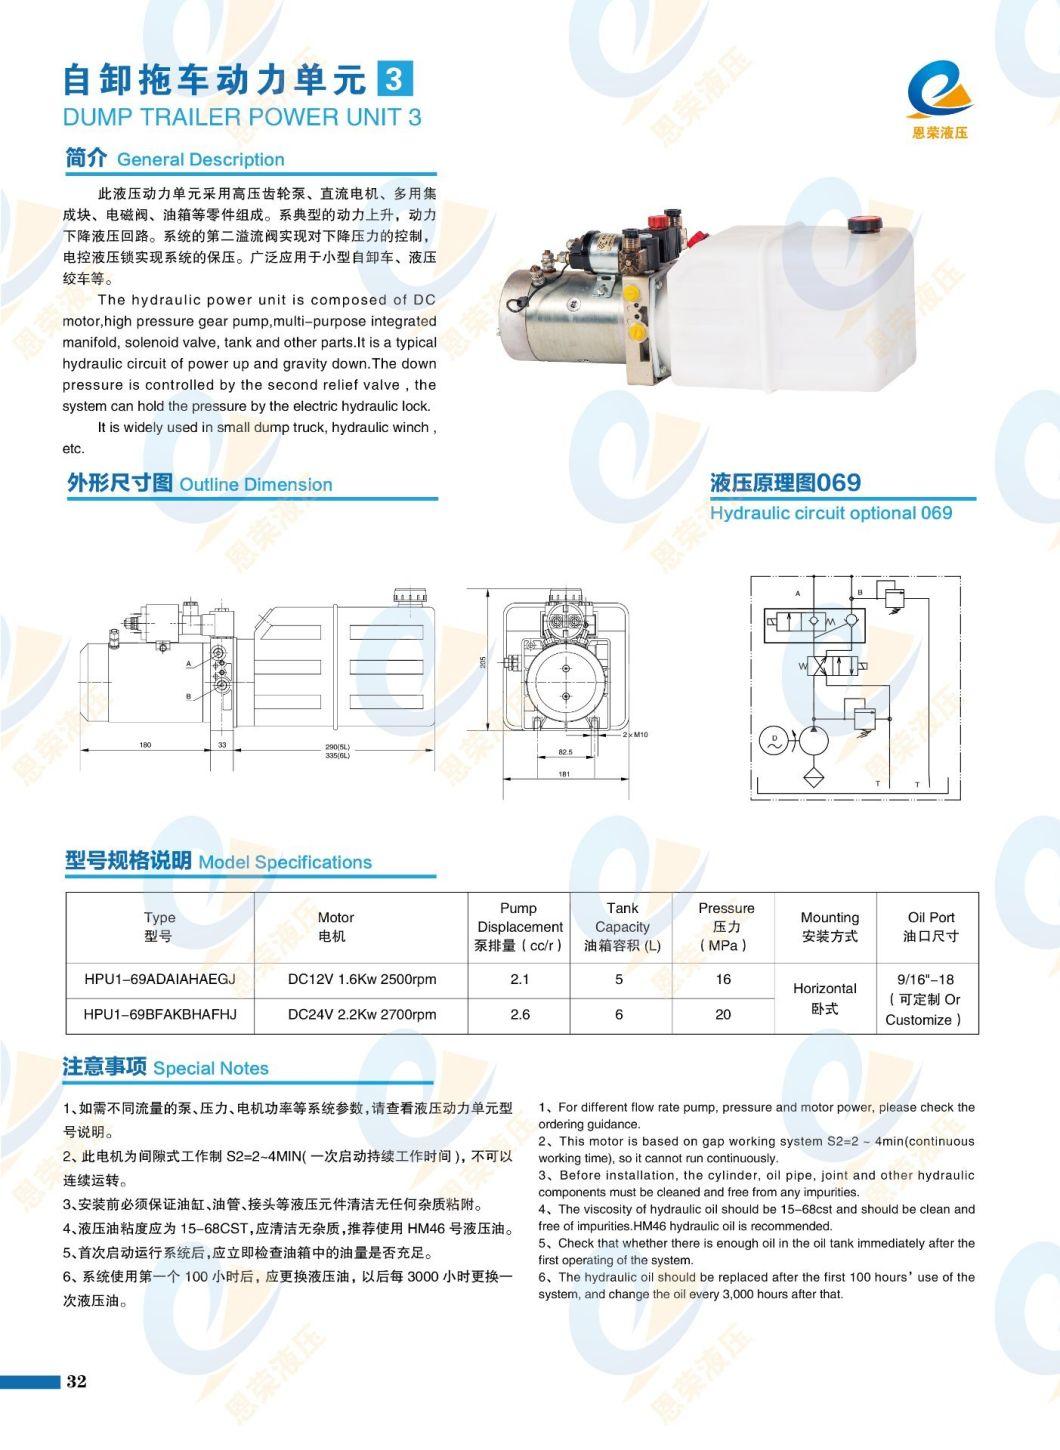 The Double Acting Hydraulic Pump Device for Dump Truck / Dump Truck Has High Performance